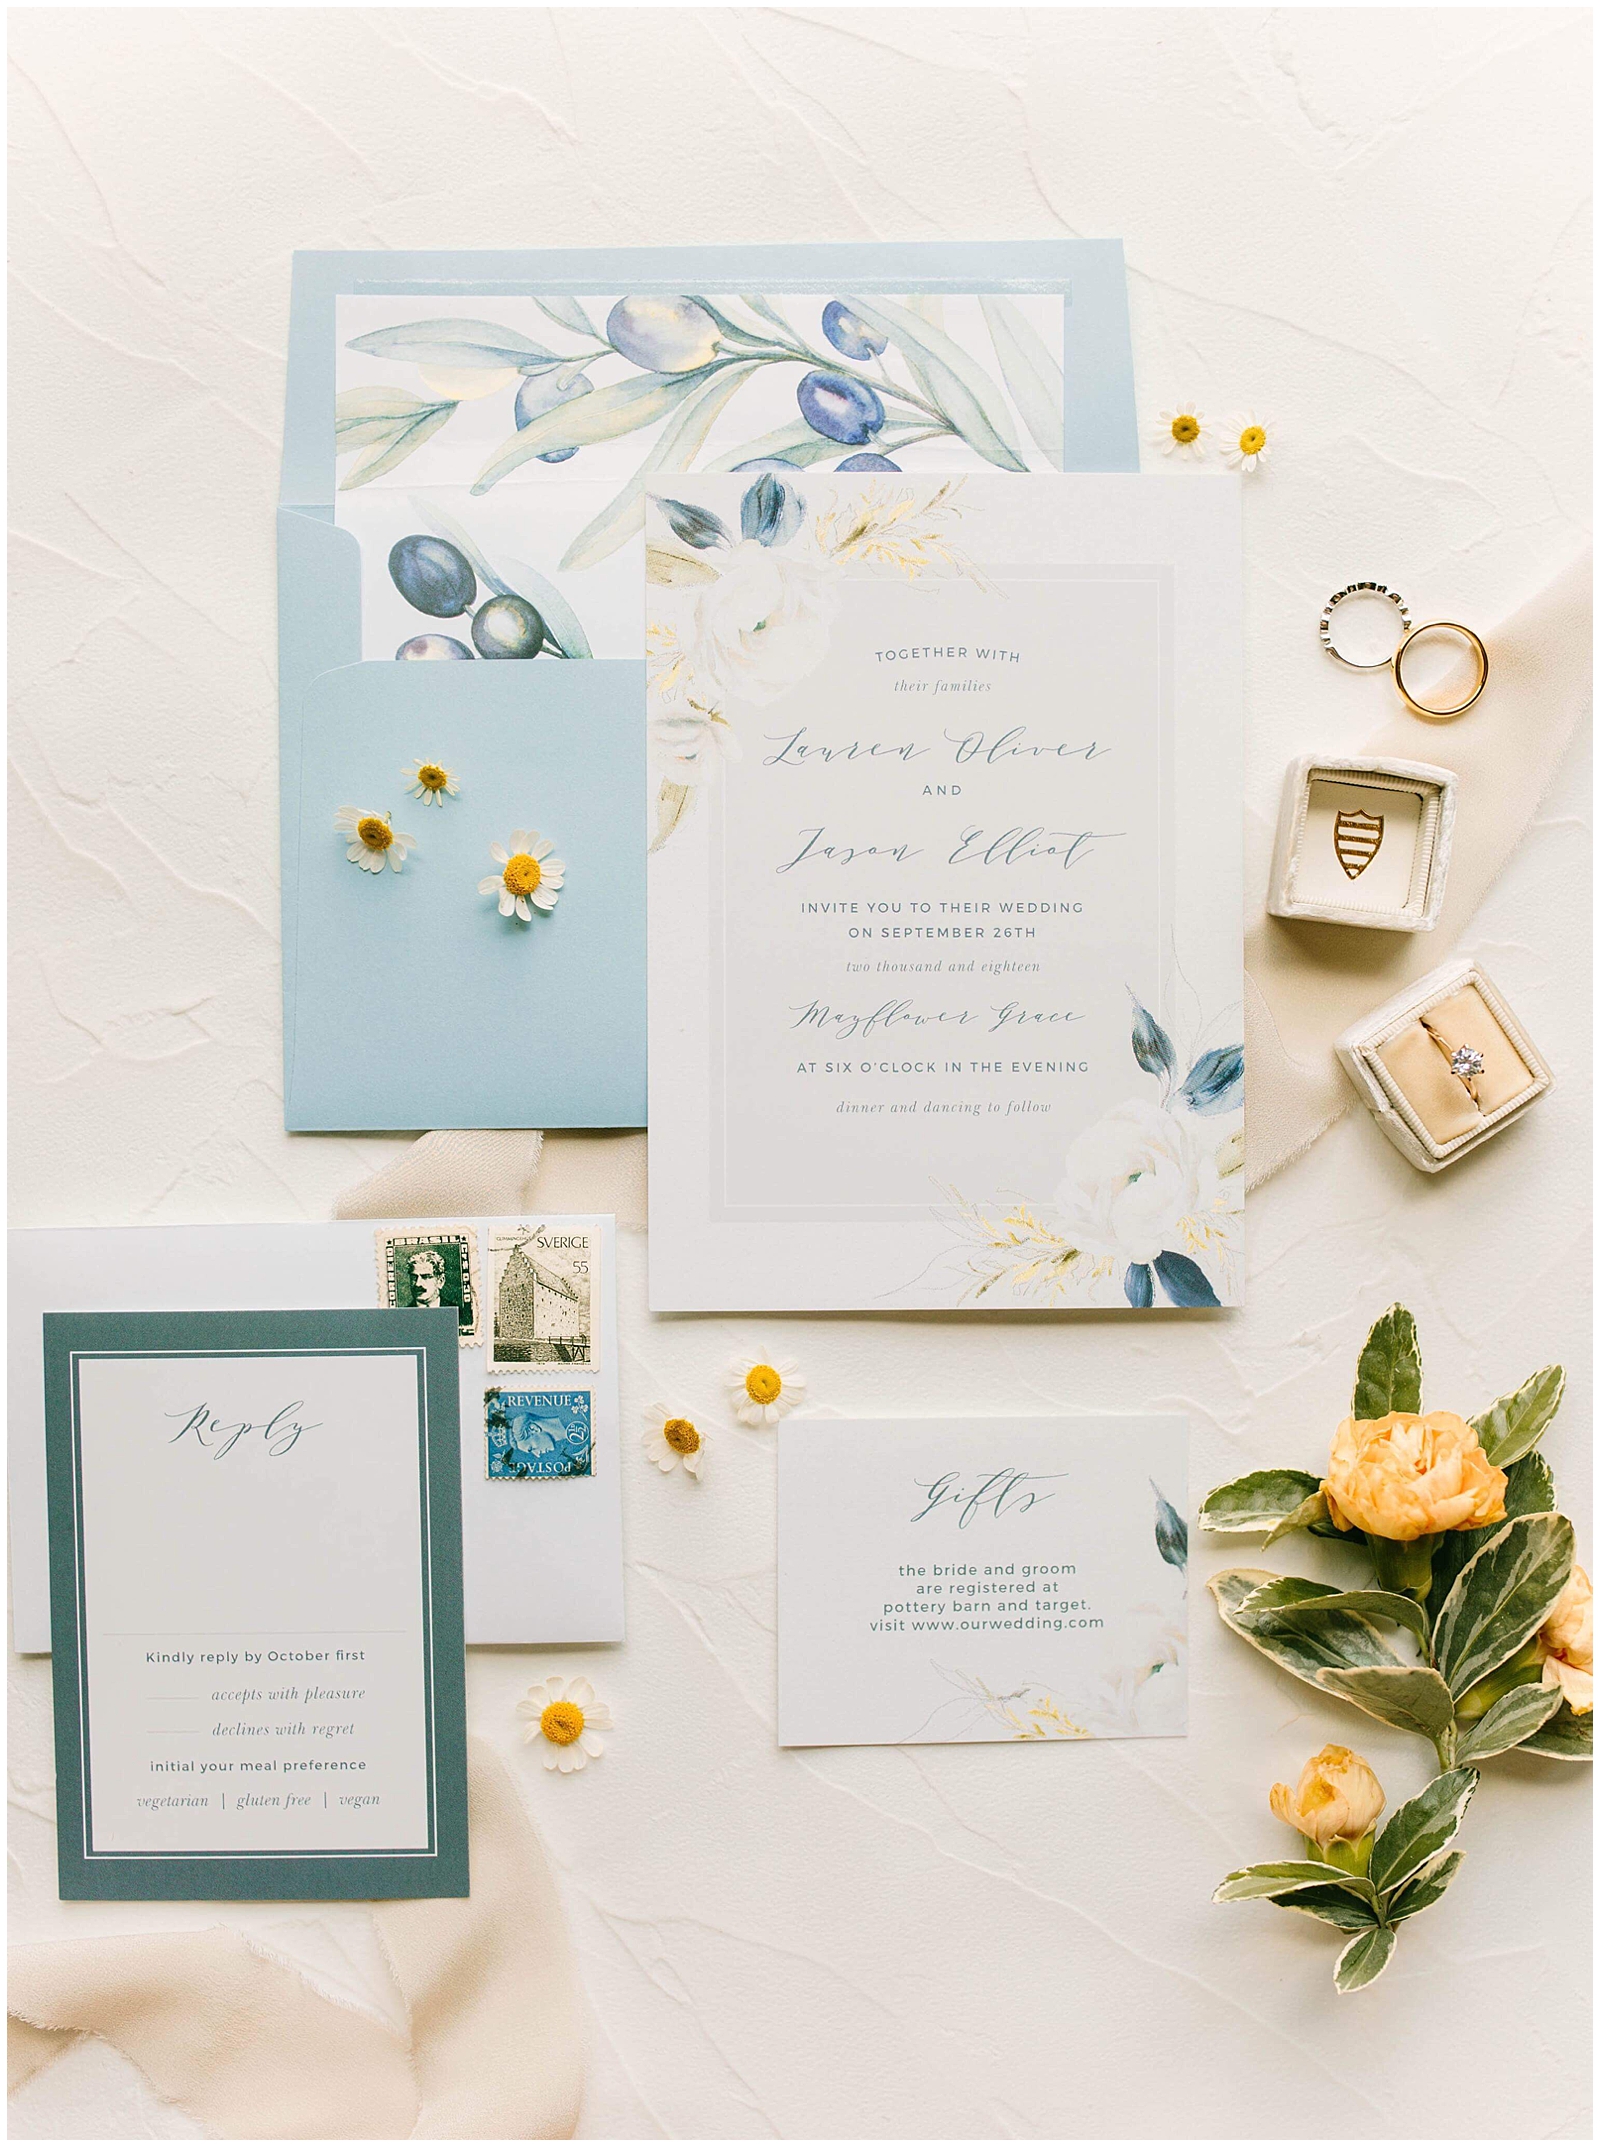 Floral Wedding Invitations in dusty blue from Basic Invite